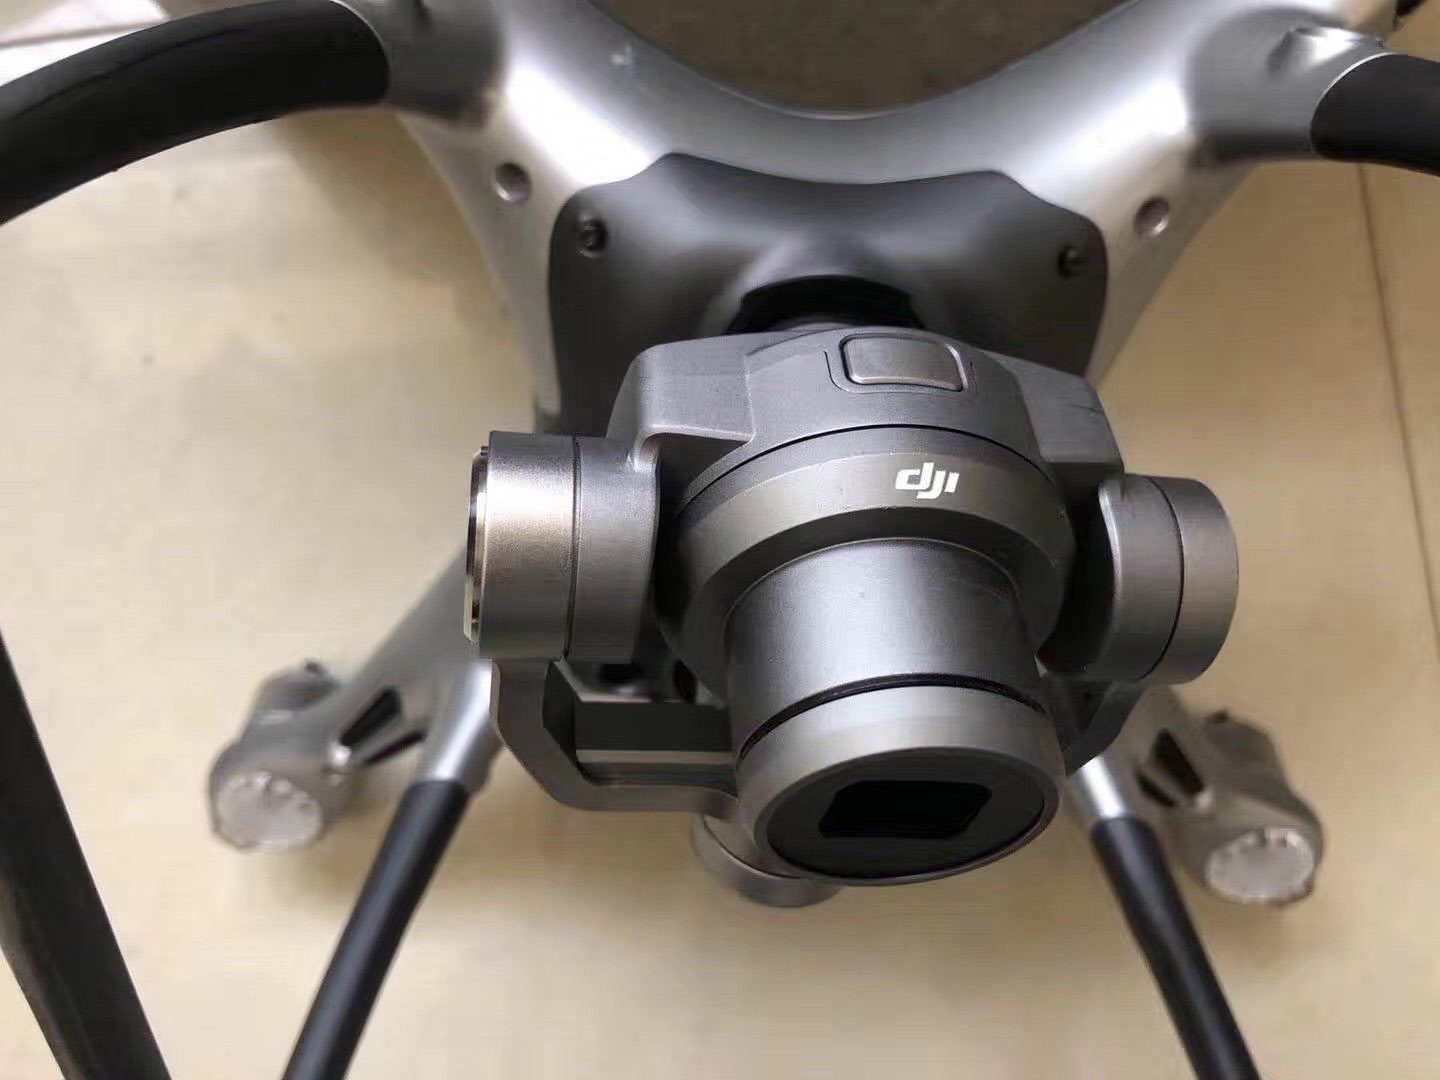 Newly leaked photos of the supposed DJI Phantom 5 show very little exterior upgrades